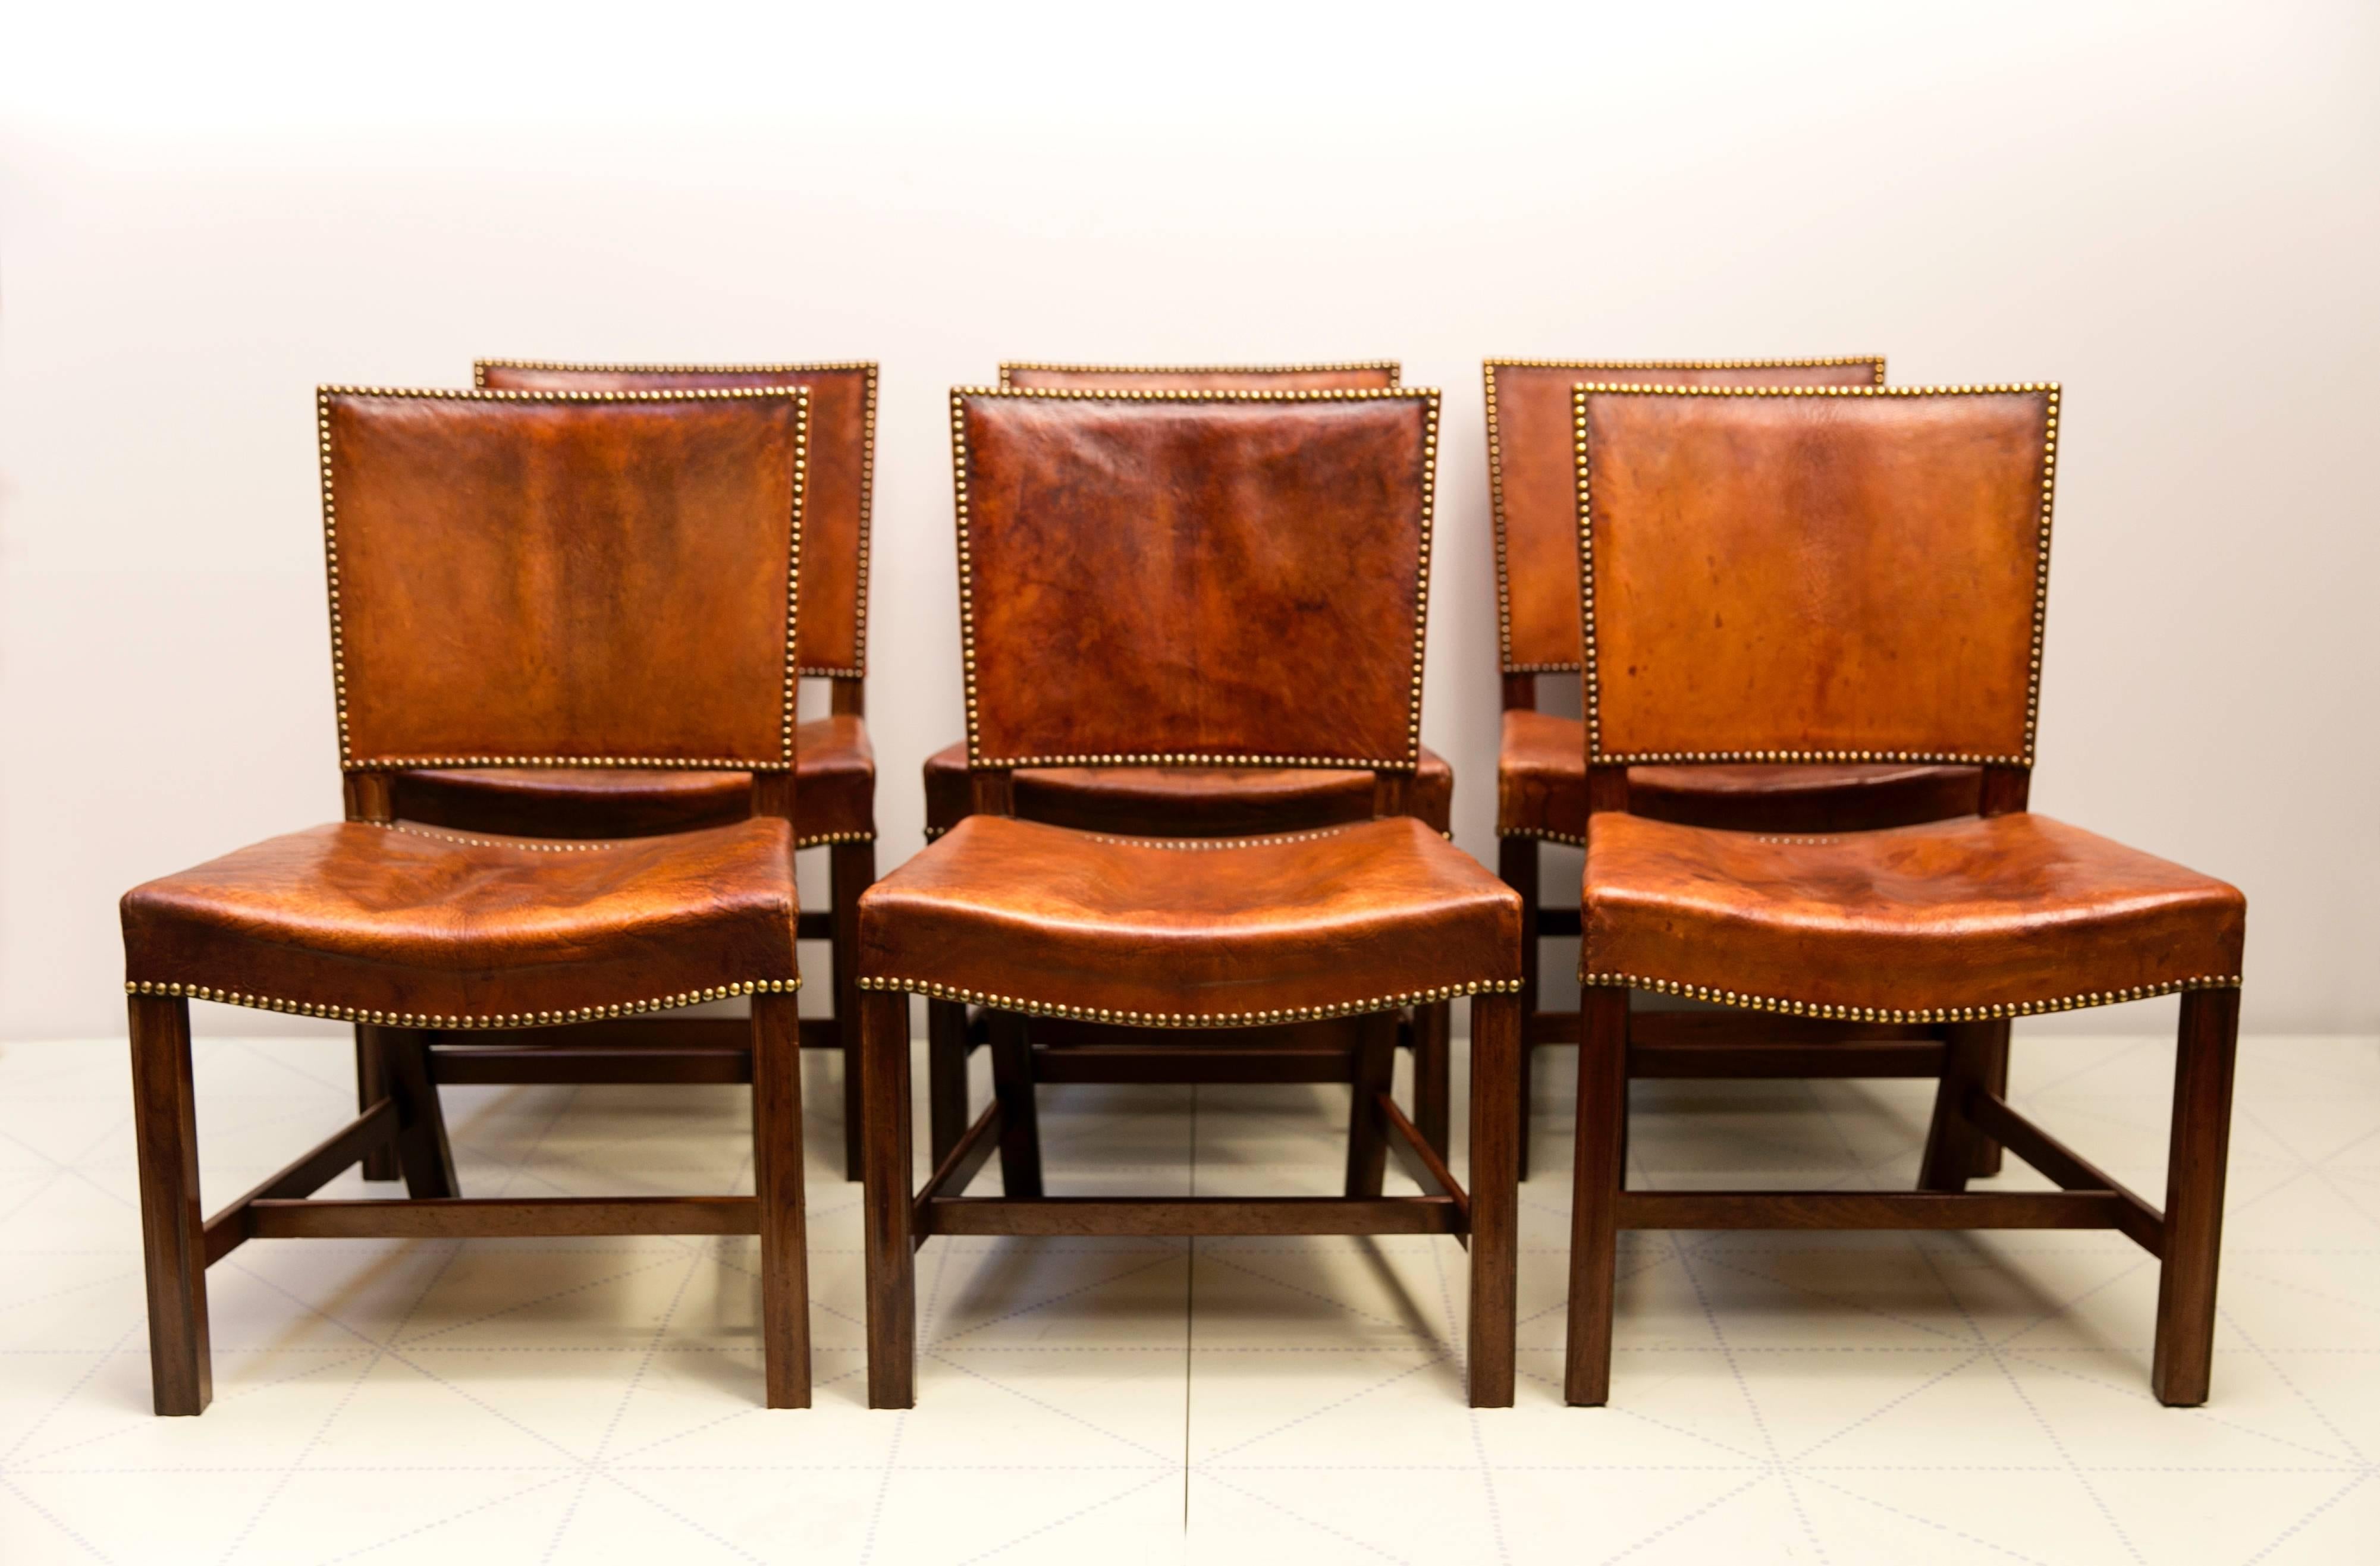 Six Large “Red Chairs” by Kaare Klint in Original Patinated Nigerian Goatskin. This early set of six chairs in Cuban mahogany retains its original highly patinated Nigerian goatskin upholstery and brass nails.

About the Red chair.
The “Red Chair”